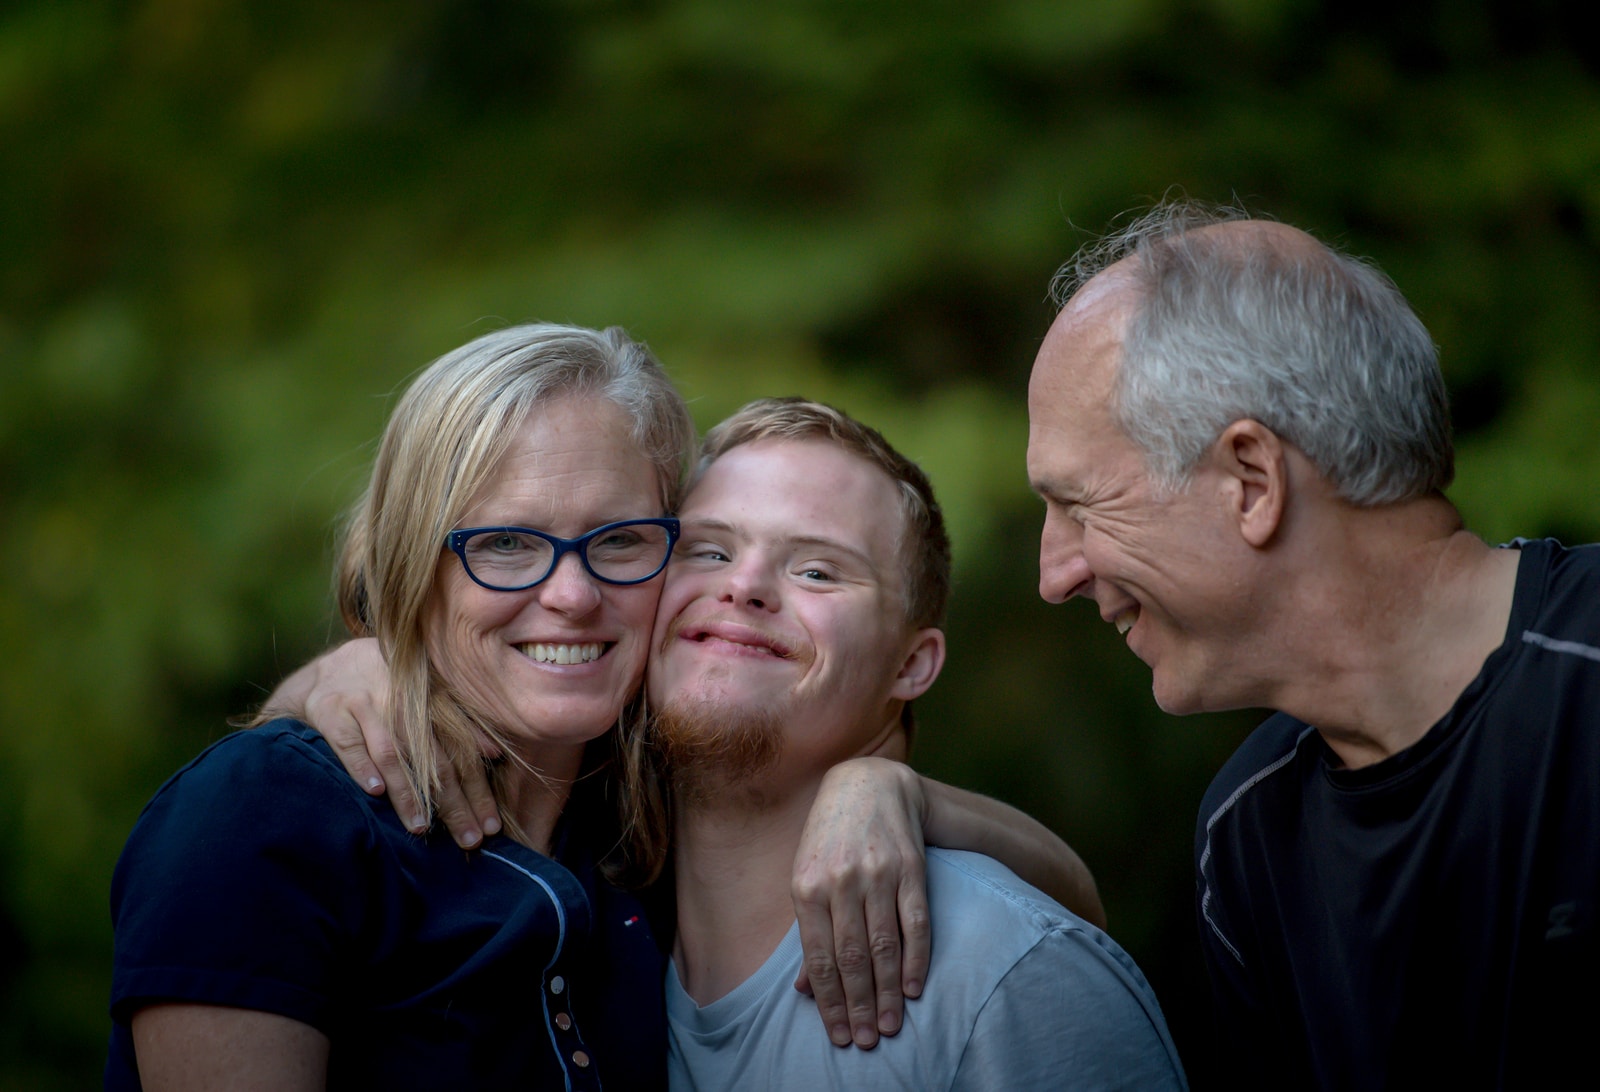 parents with Down syndrome young man